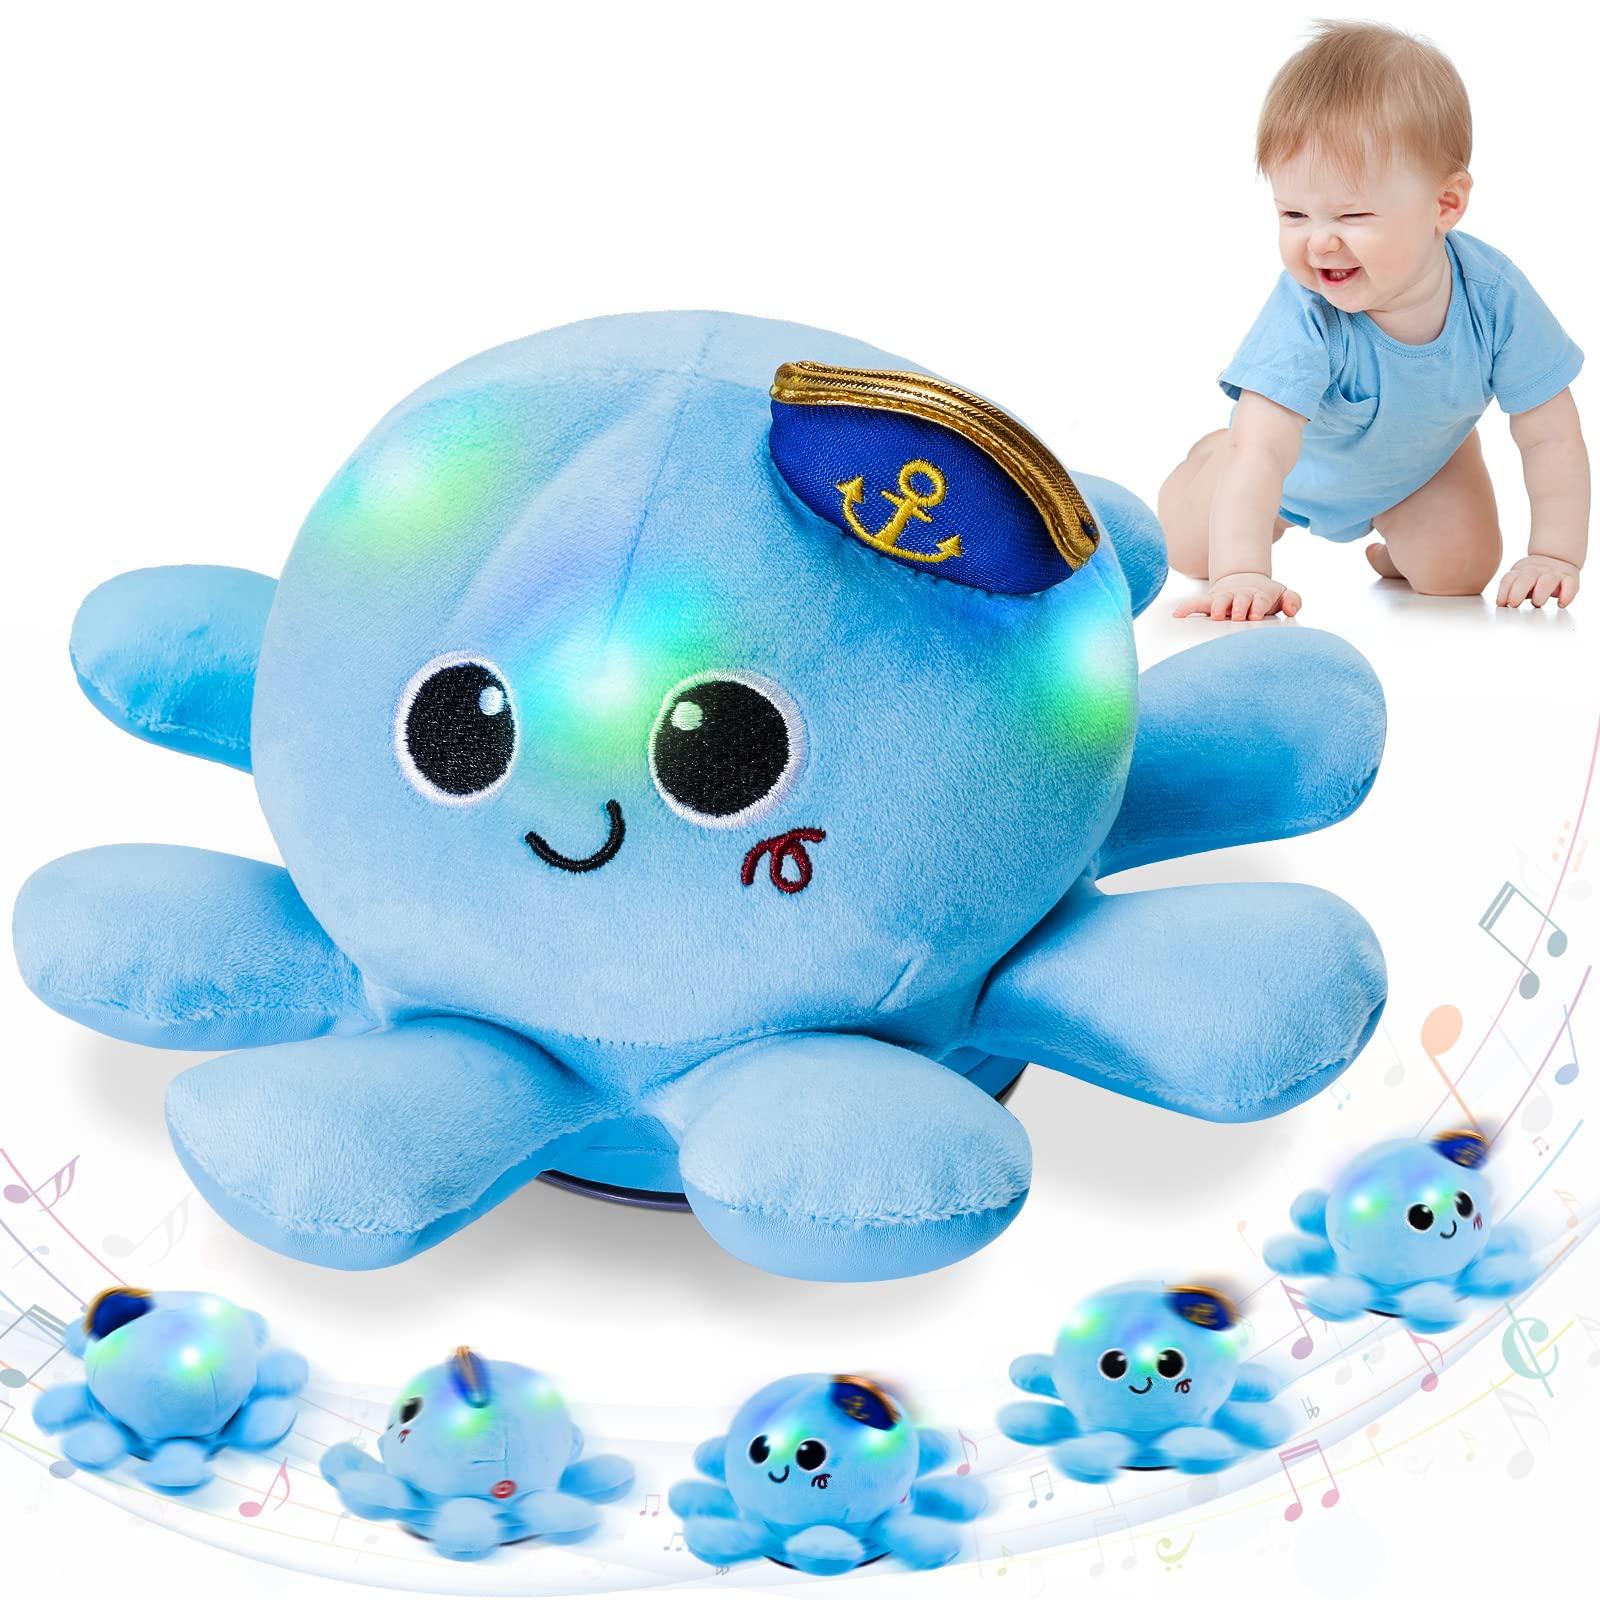 FancyWhoop Baby Musical Light Crawling Toys - Light up Dancing Spinning Walking Soft Octopus Toy for Boys Girls Kids, Sensory Interactive Baby Gifts for Toddlers 0